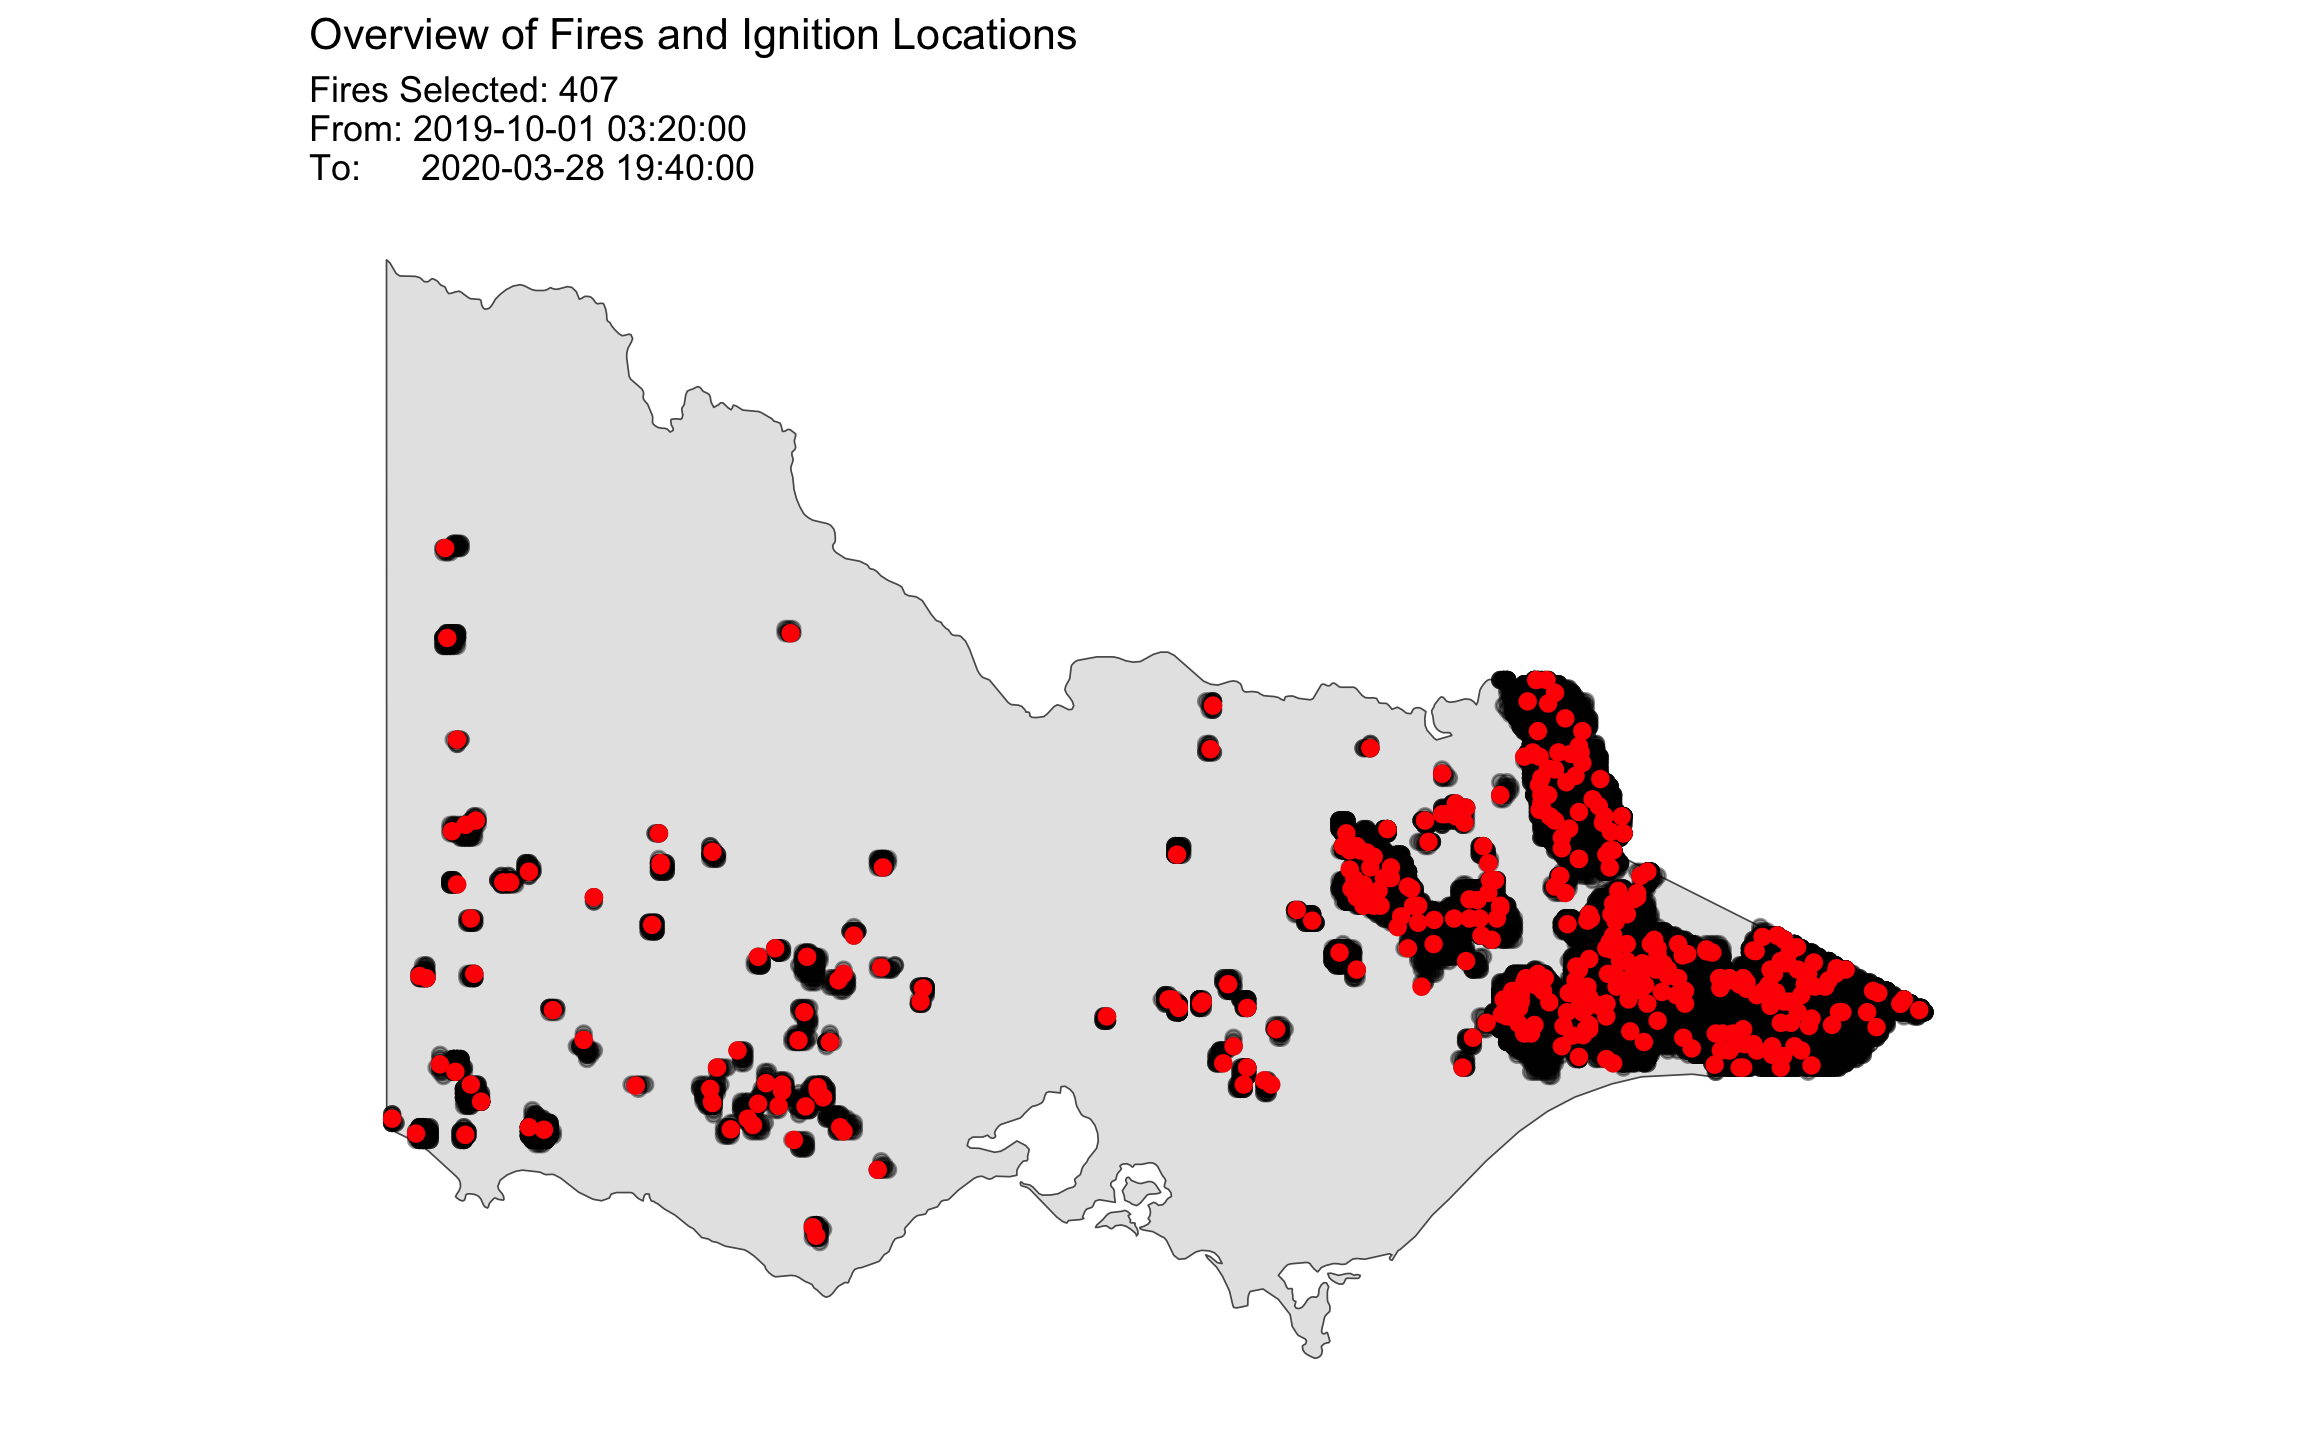  The distribution of hotspots (black) and bushfire ignitions (red) in Victoria during 2019-2020 Australian bushfire season. The spatial distribution of the ignition locations suggest that most of the fires were observed in the east of Victoria.